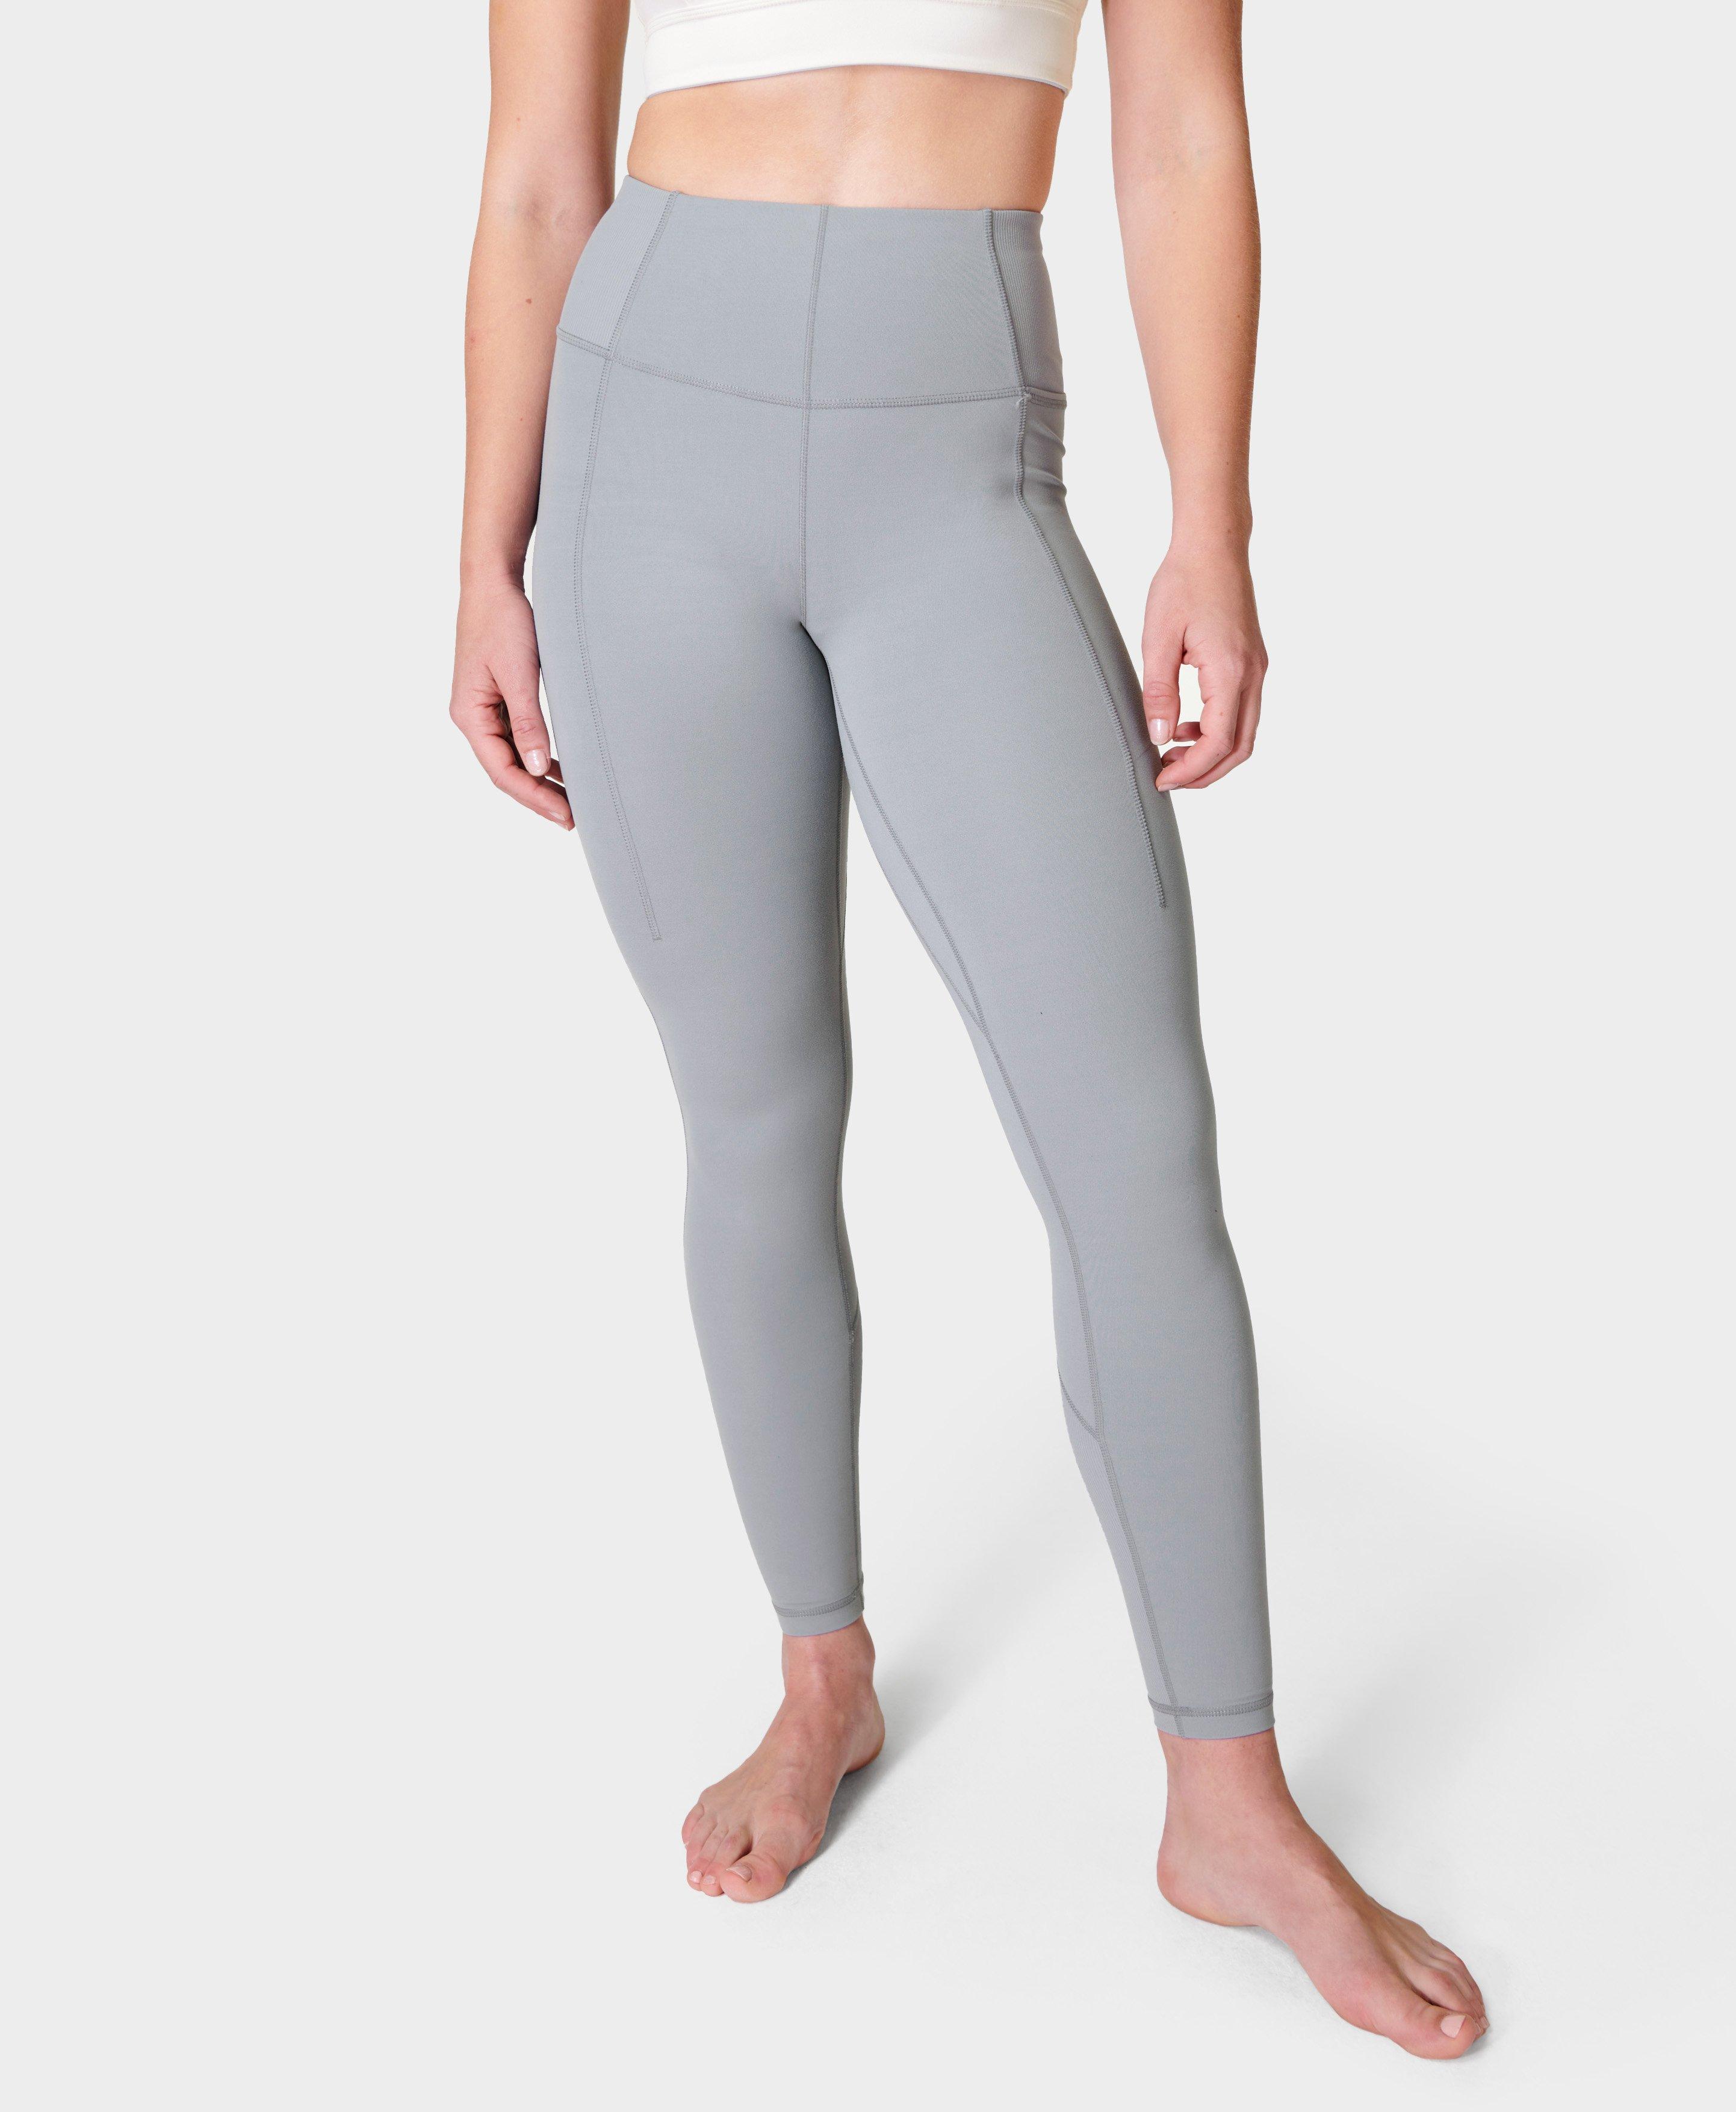 DASAYO Sales Today Clearance Stirrup Yoga Leggings for Women High